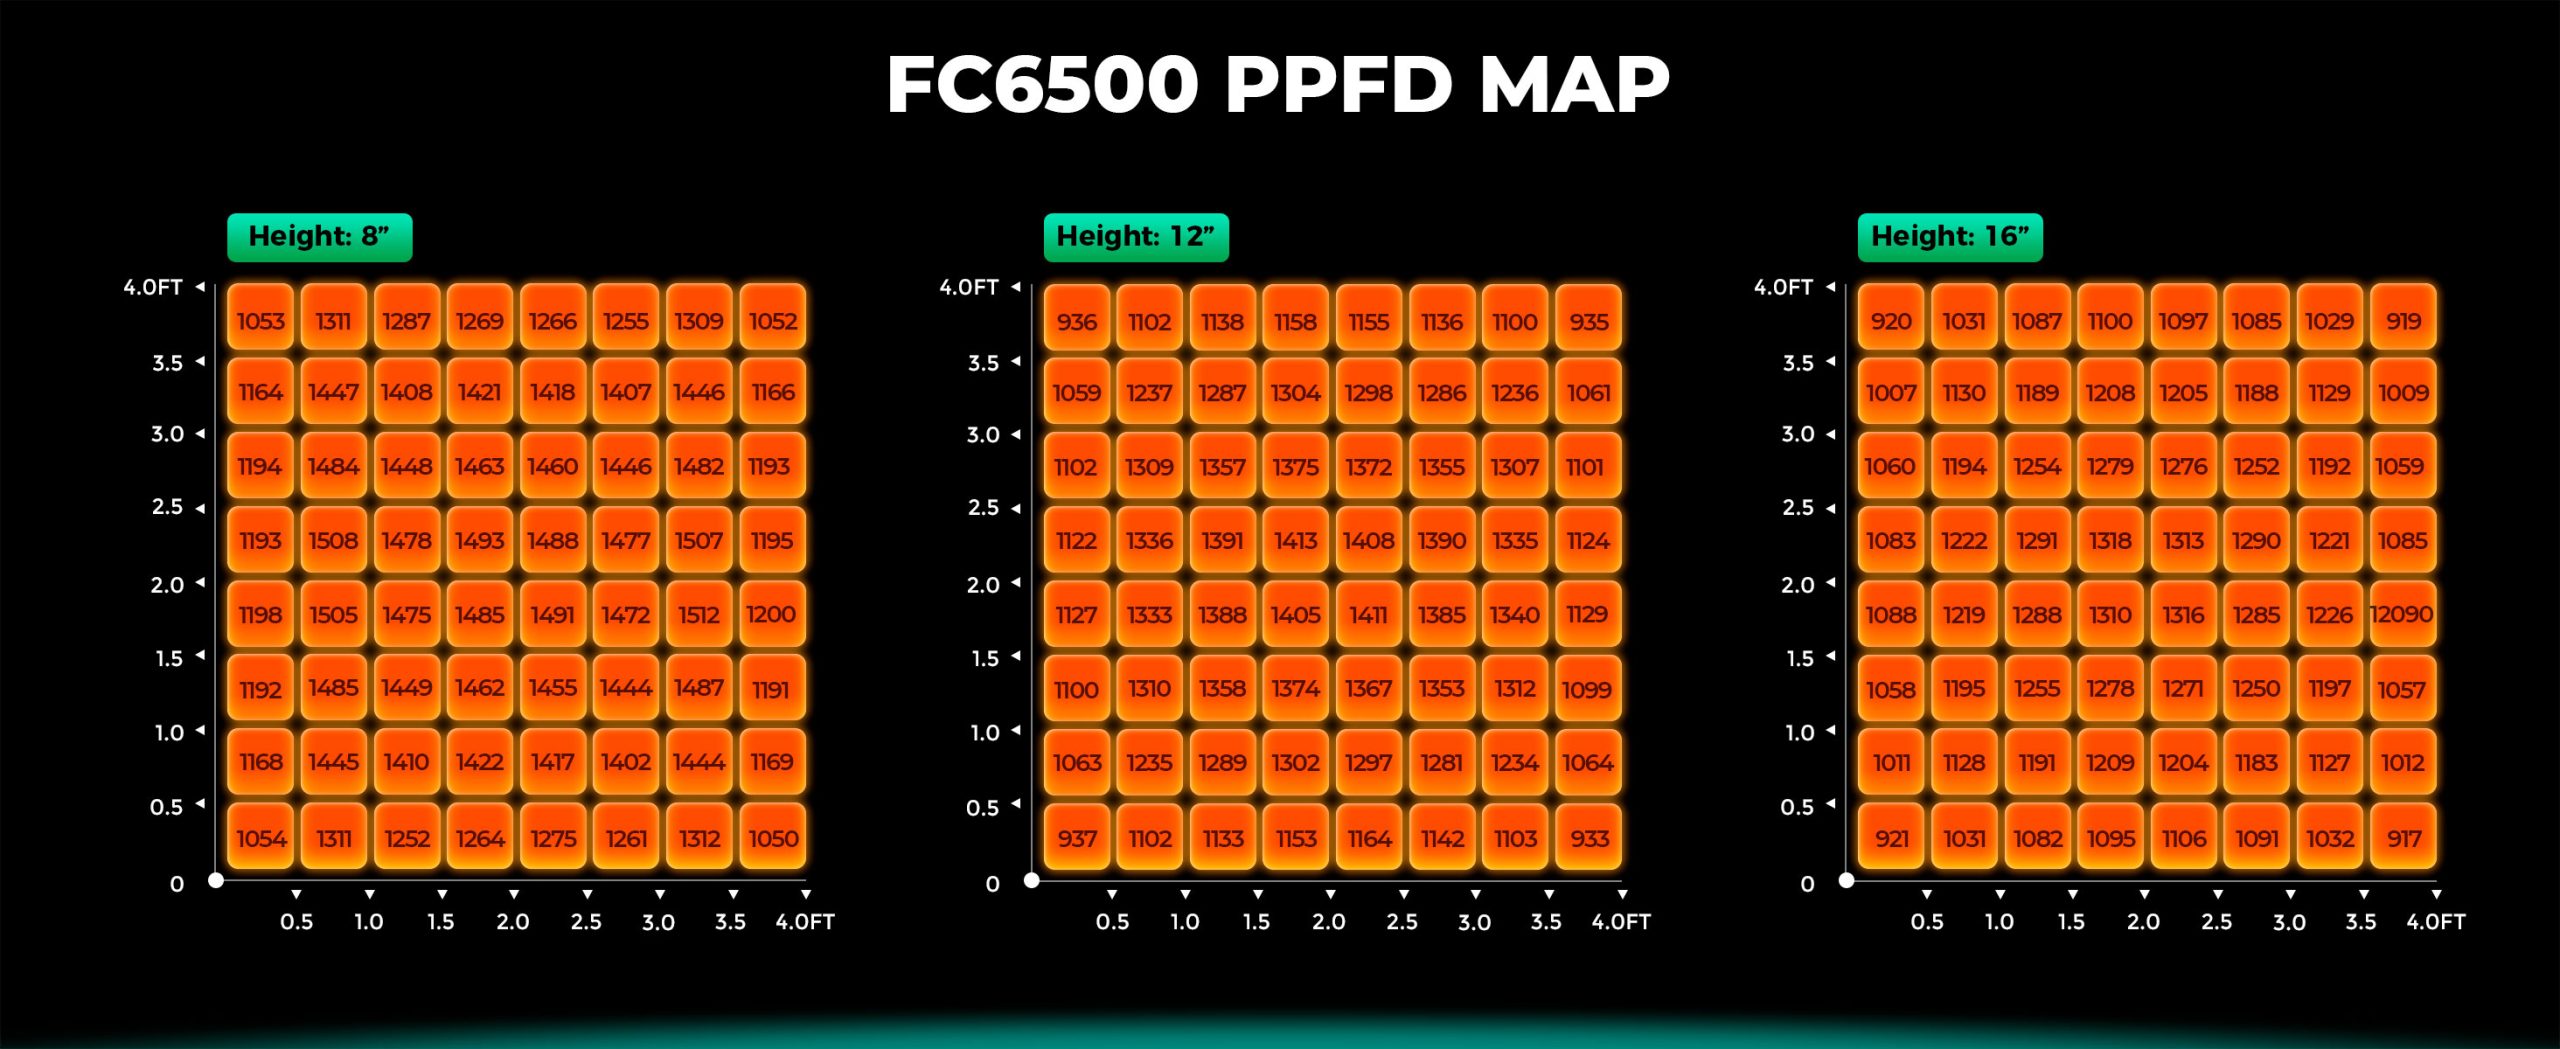 High and Uniform PPFD of FC6500